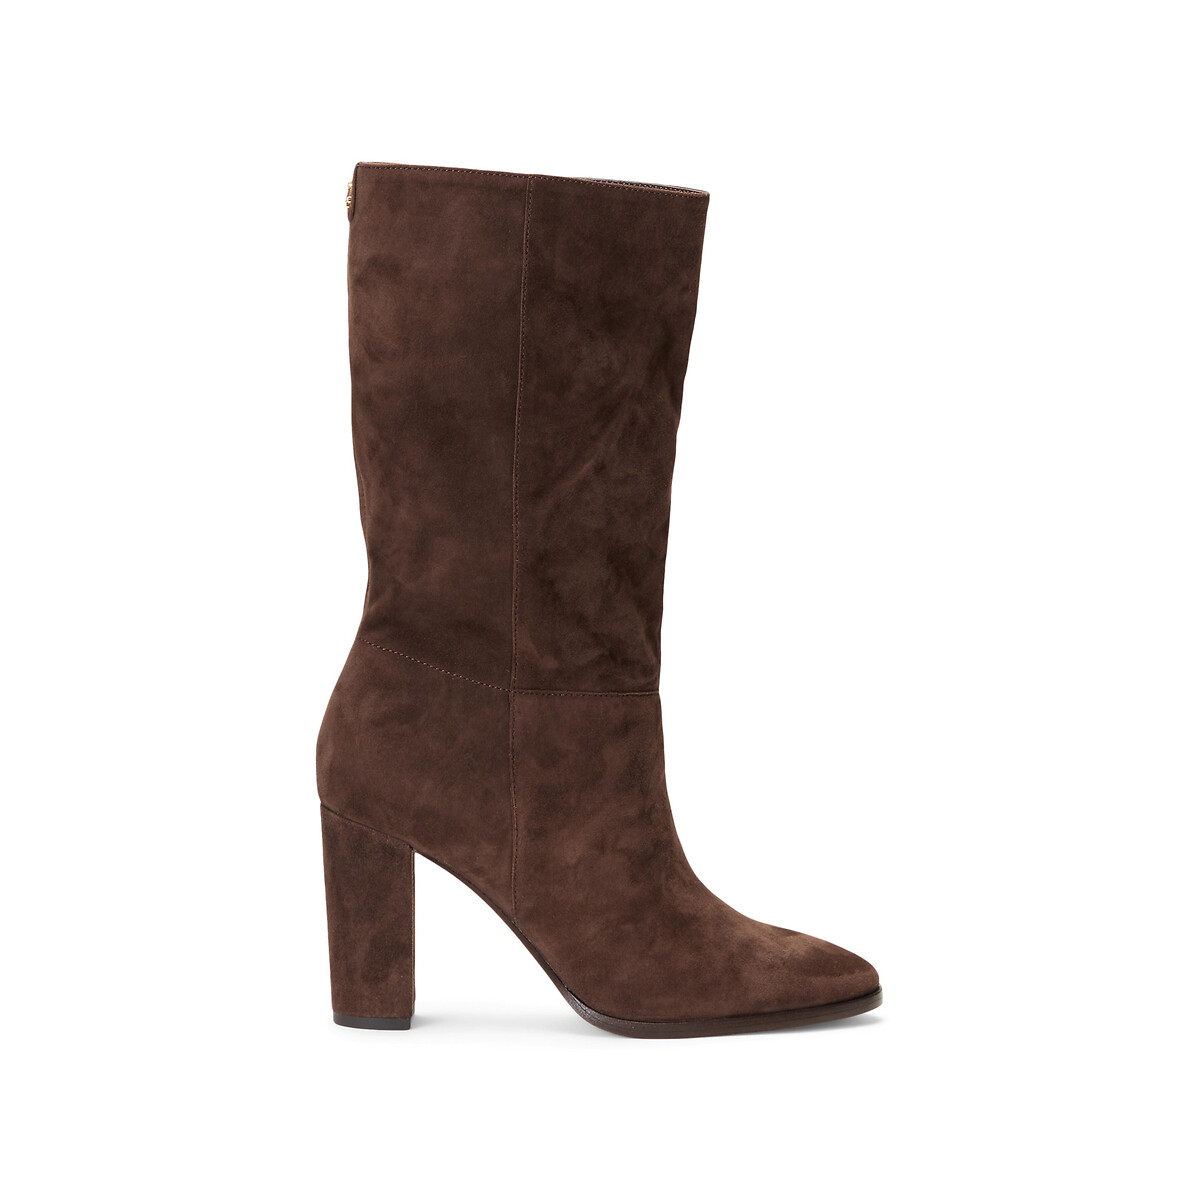 Pull-On Calf Boots in Suede with Pointed Toe and Block Heel